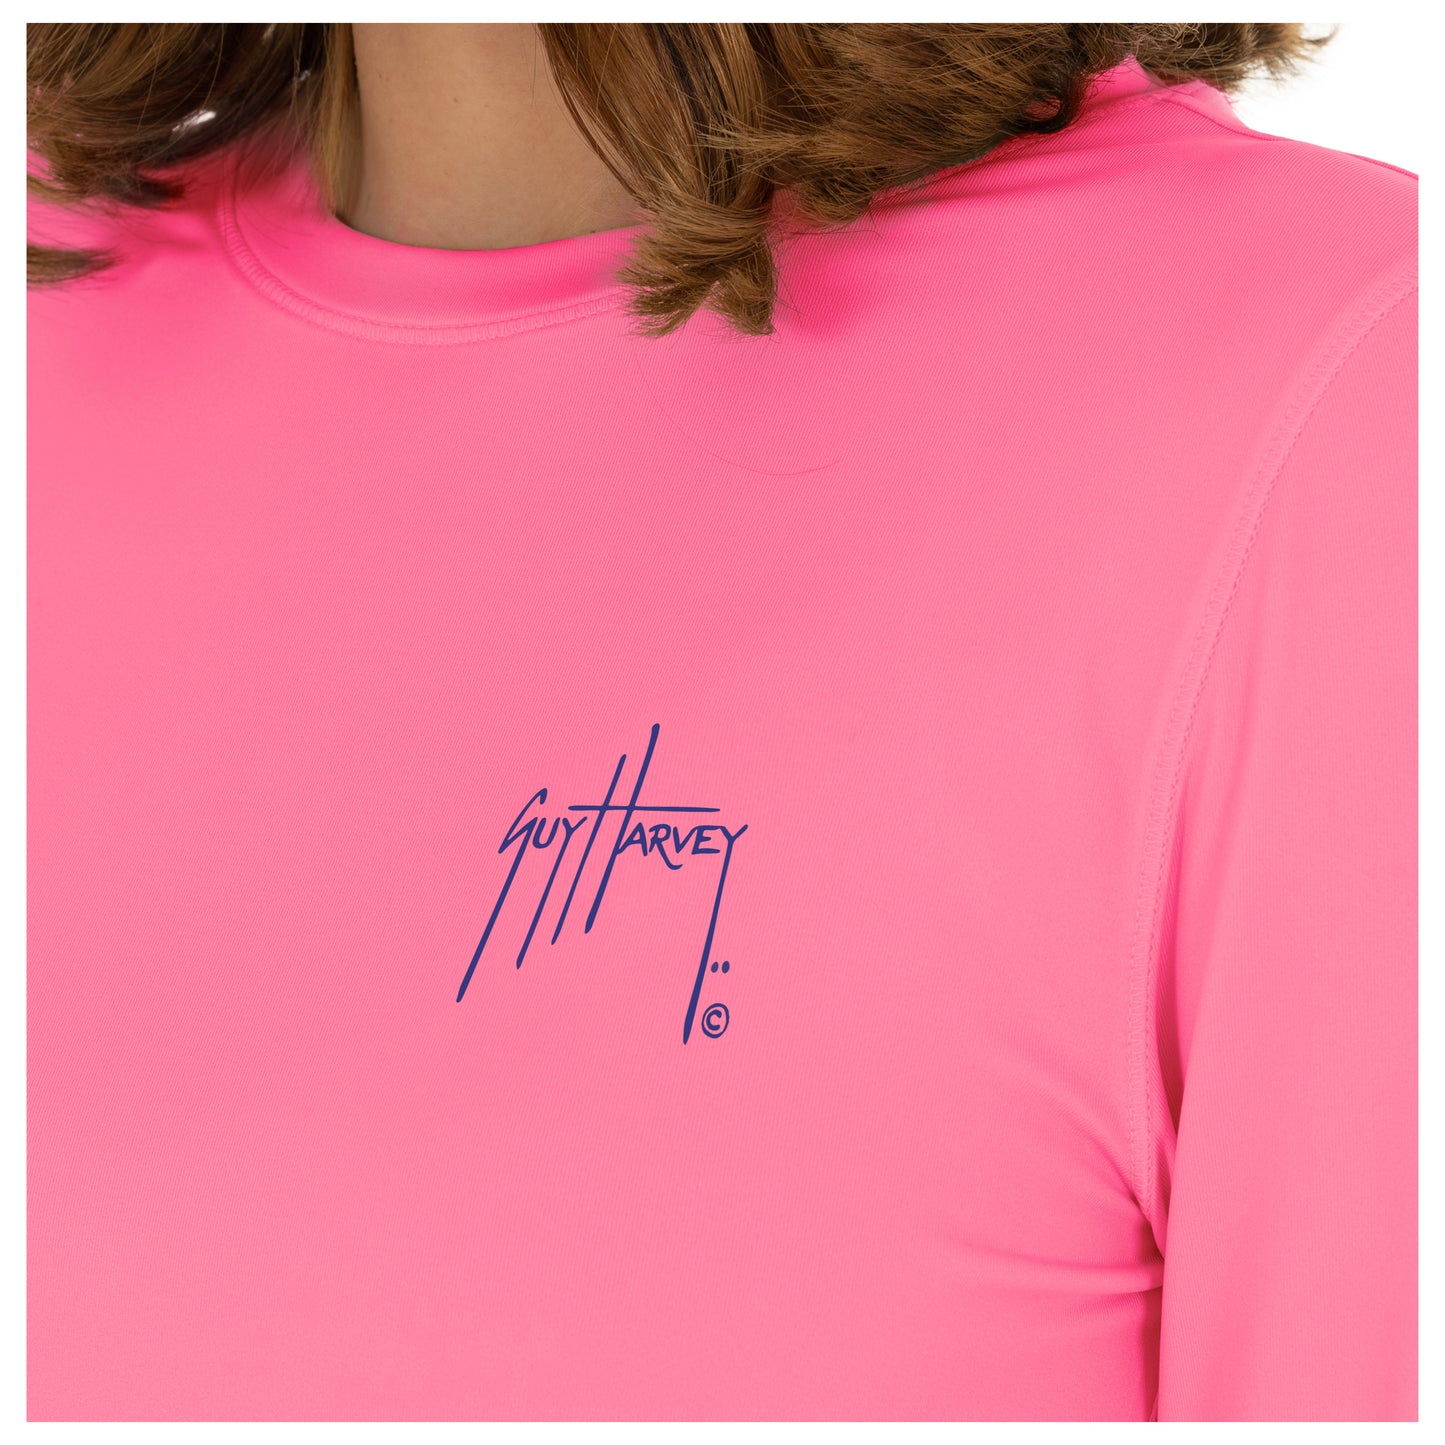 Ladies Core Solid Pink Sun Protection Top